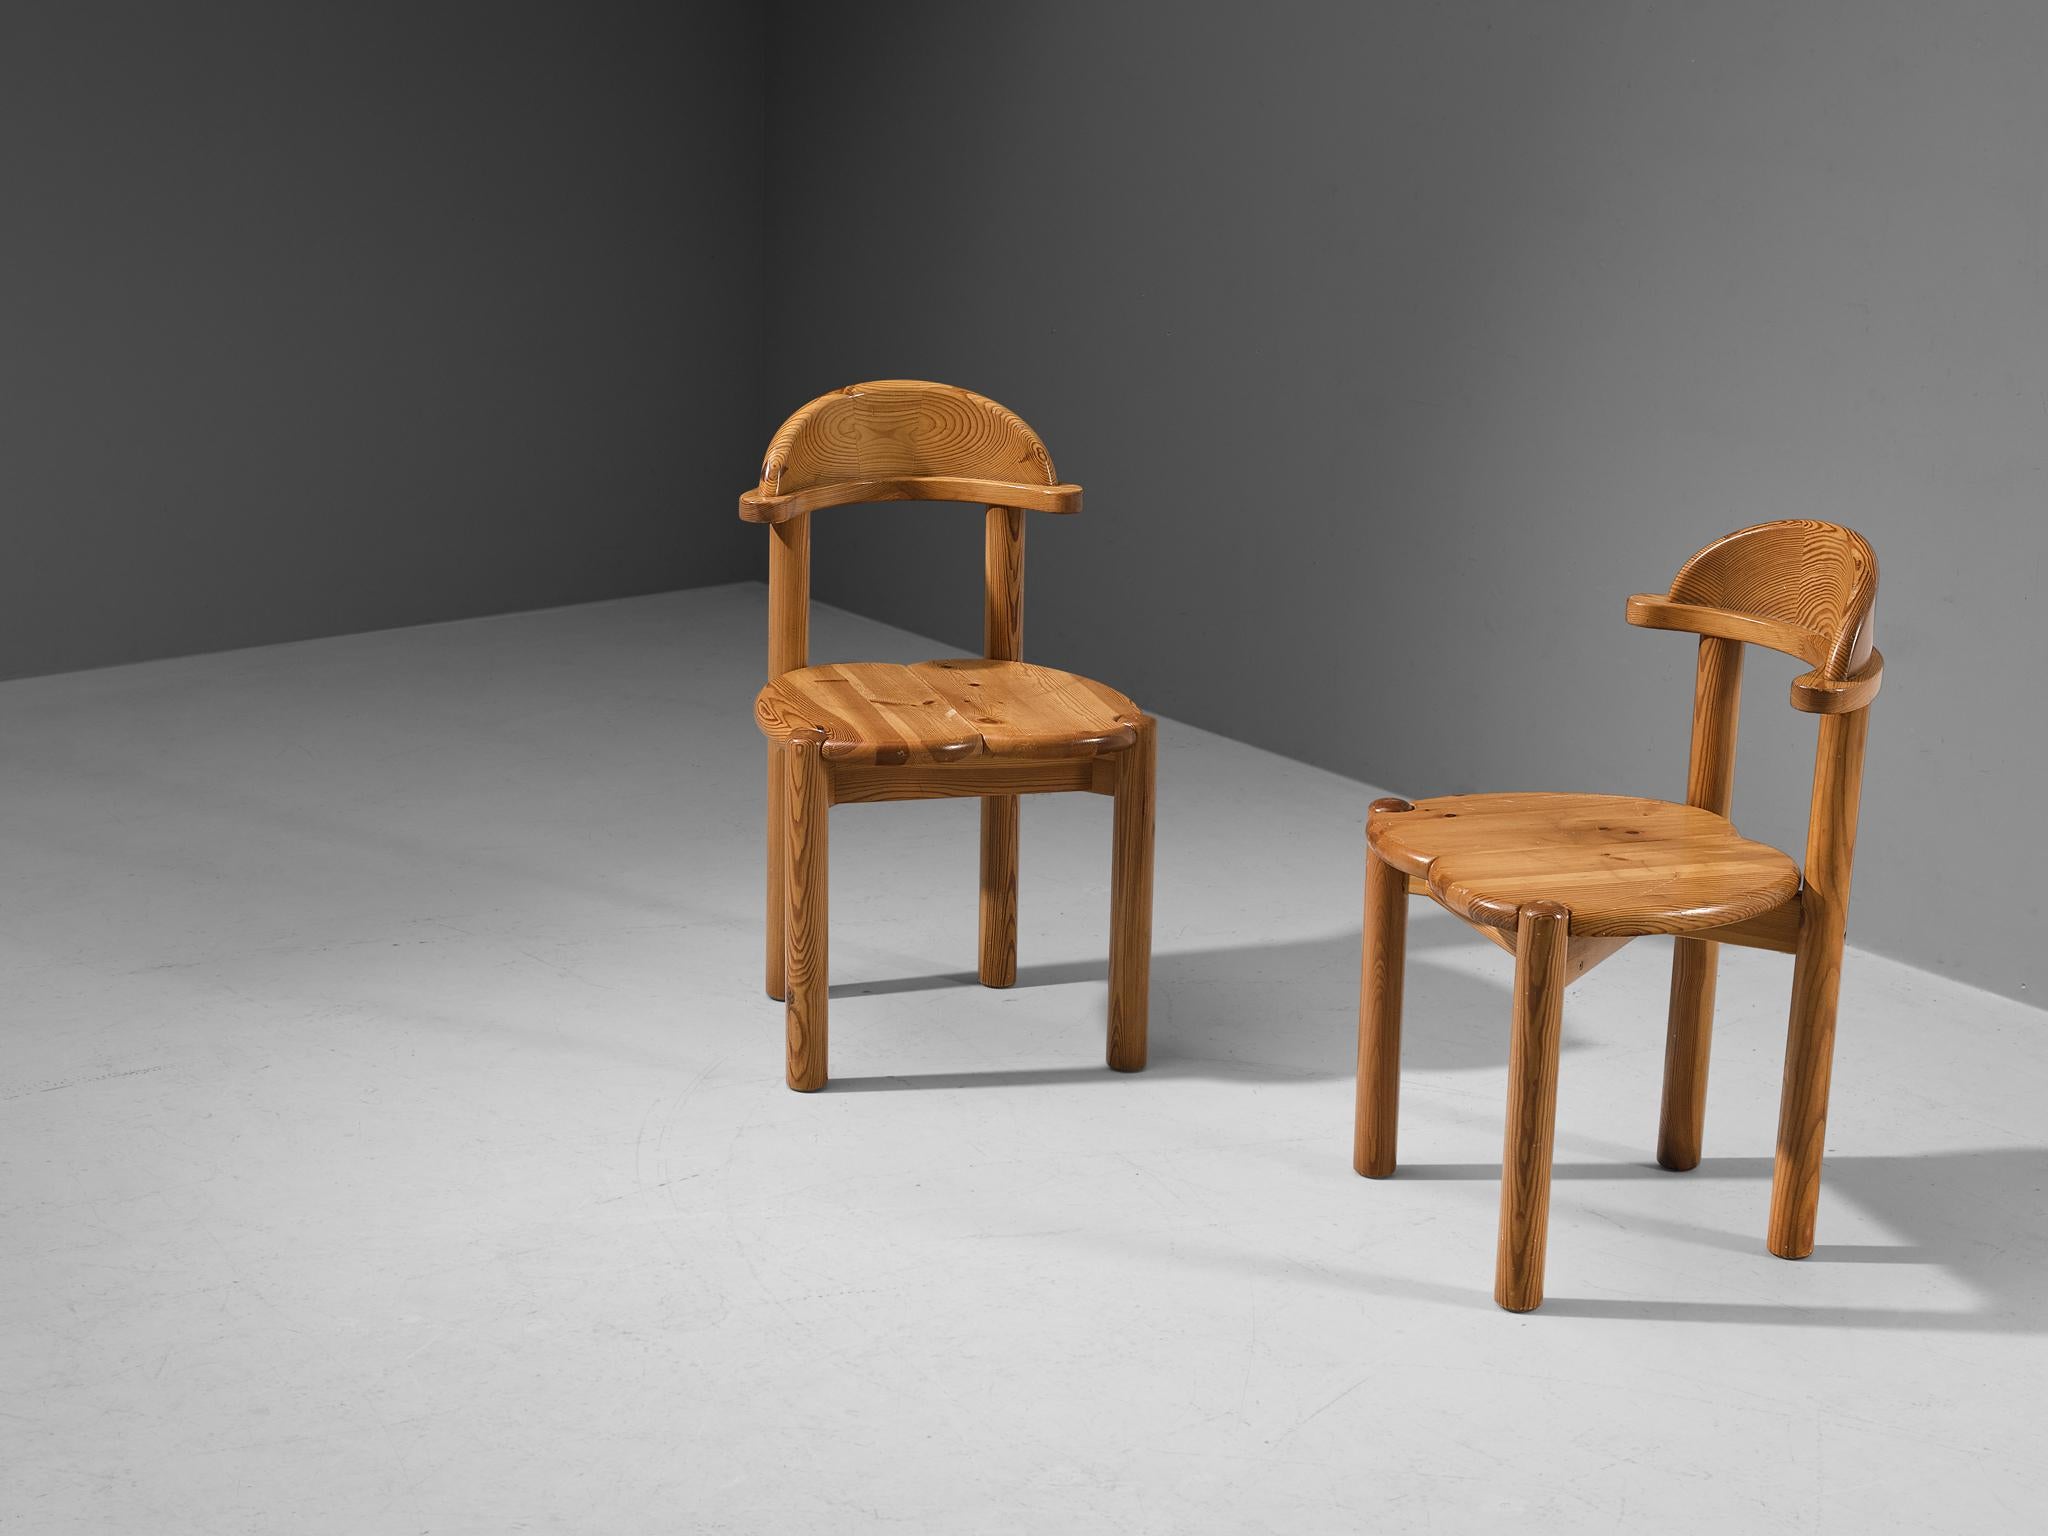 Dining chairs, pine, Denmark, 1970s. 

Pair of beautiful, organic and natural dining chairs in solid pine. A simplistic design with a round seating made of two wooden panels. A clear attention for the natural expression and grain of the wood is